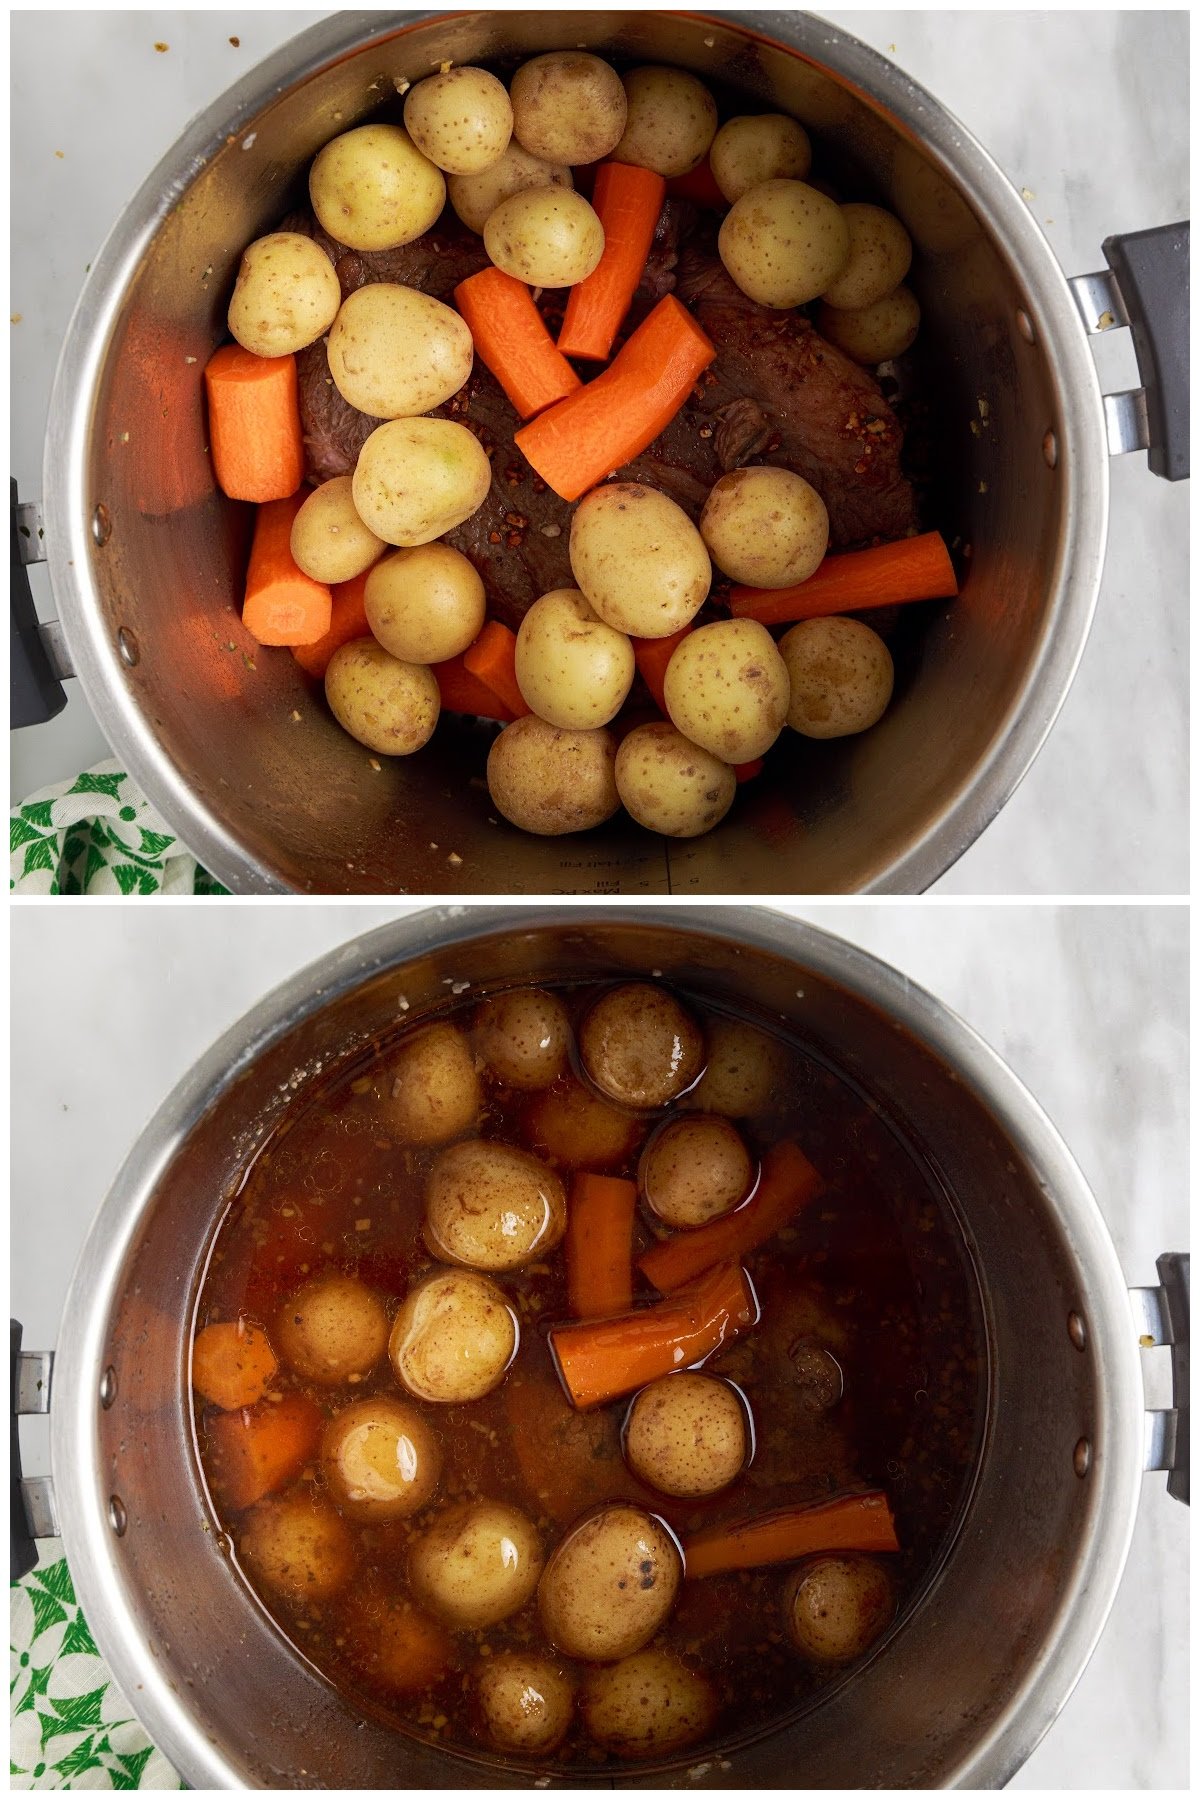 Adding the broth and veggies to the instant pot.